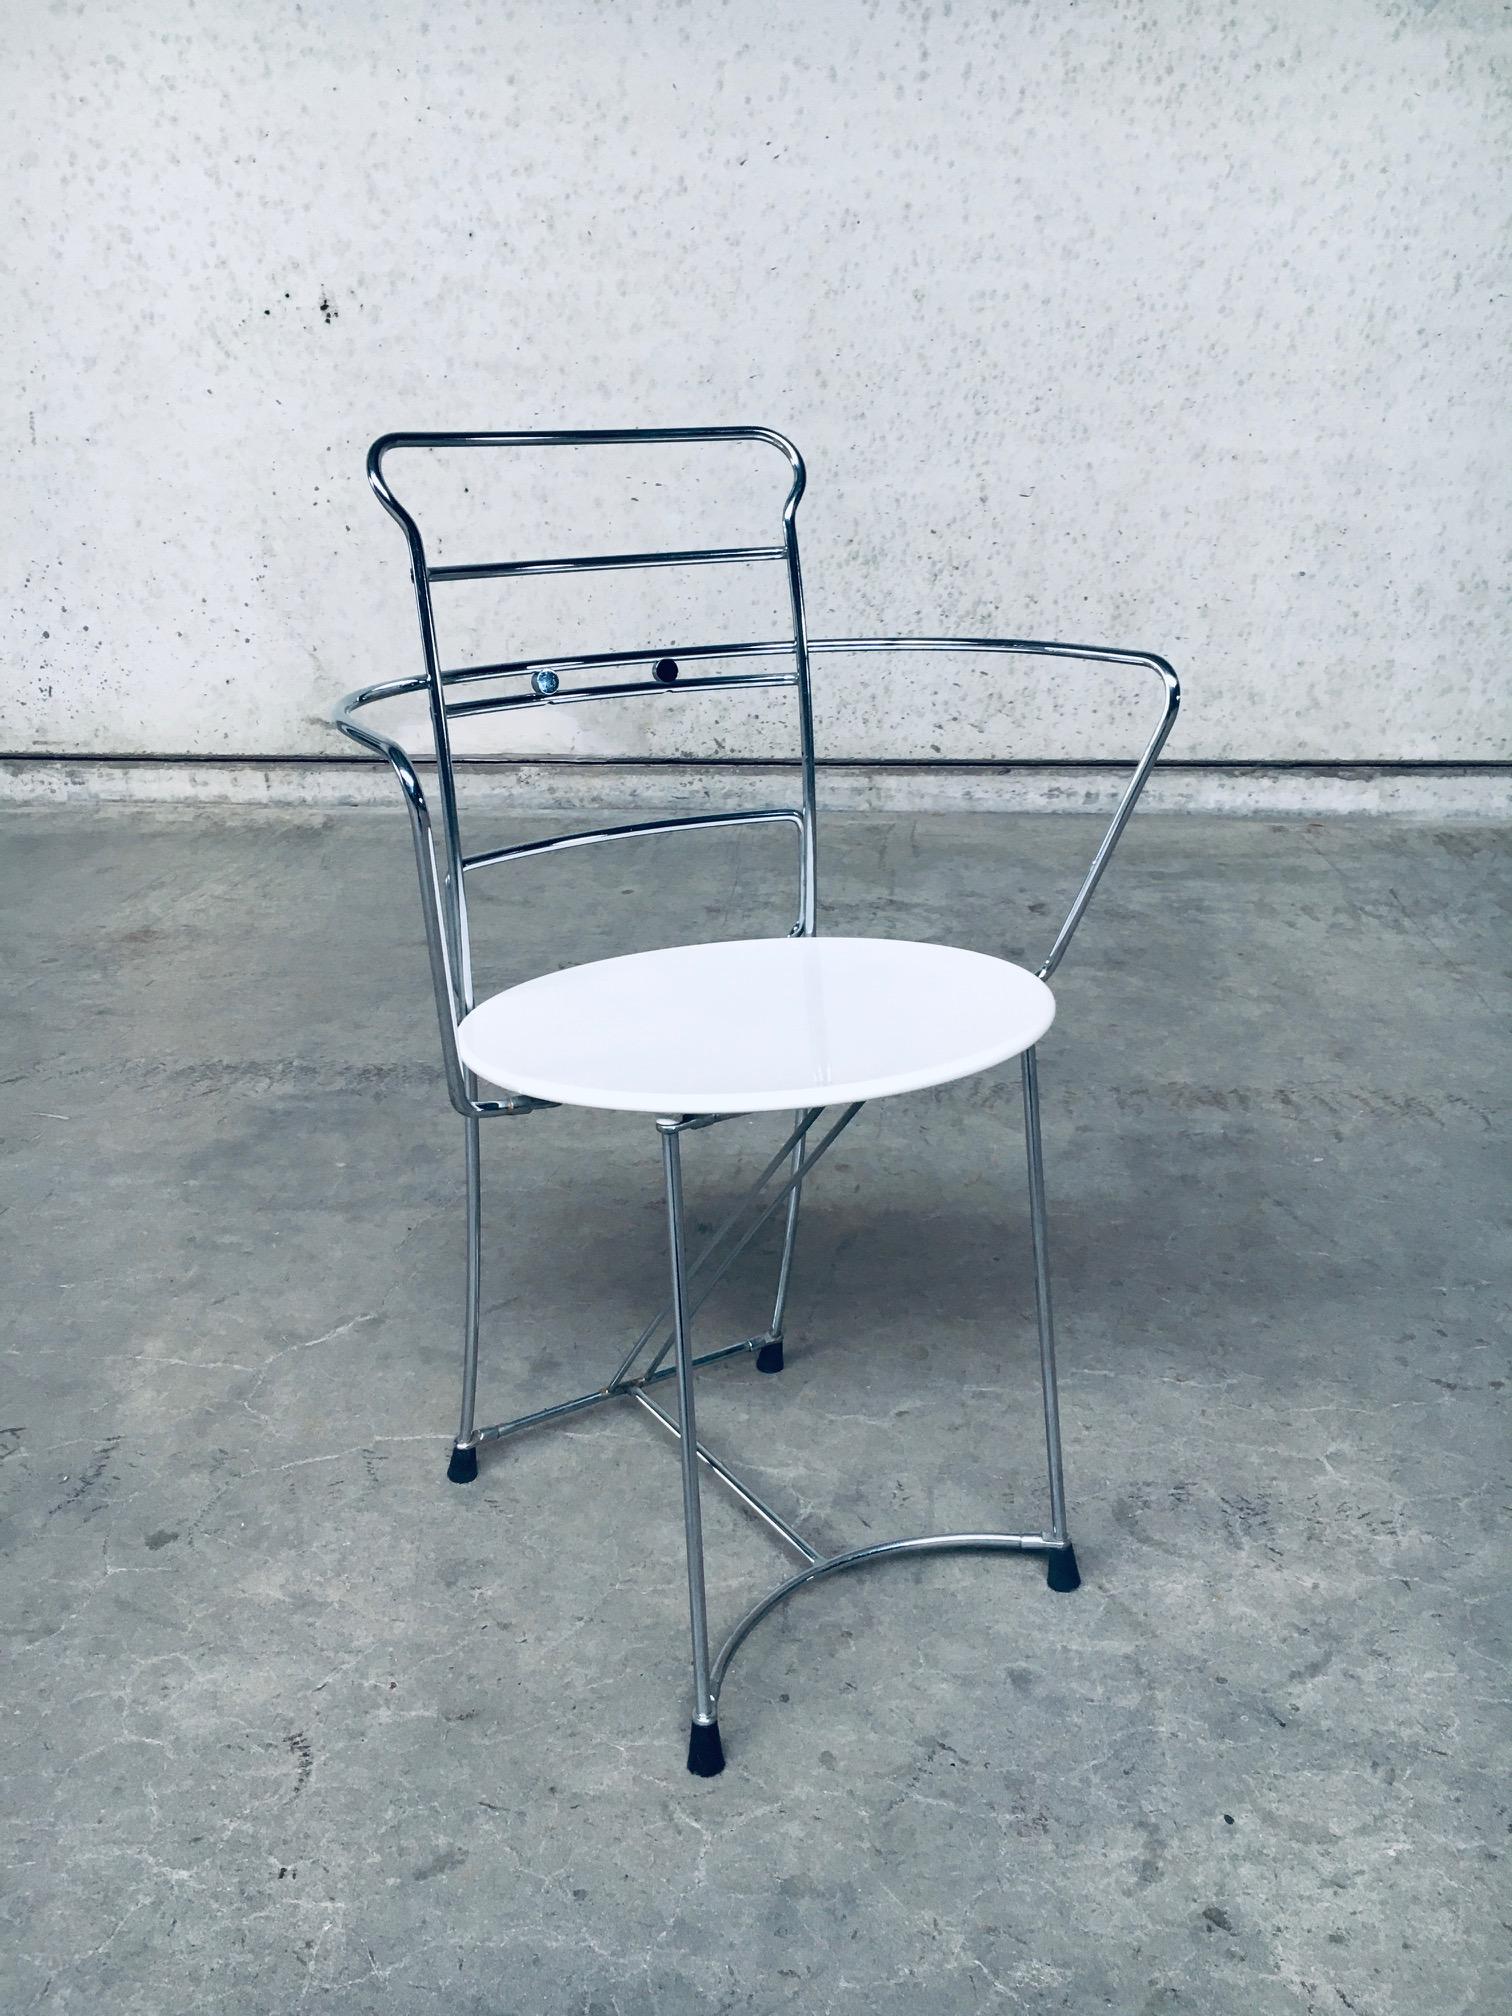 1980's Postmodern Design Chair Set Eridiana by Antonio Citterio for Xilitalia For Sale 2